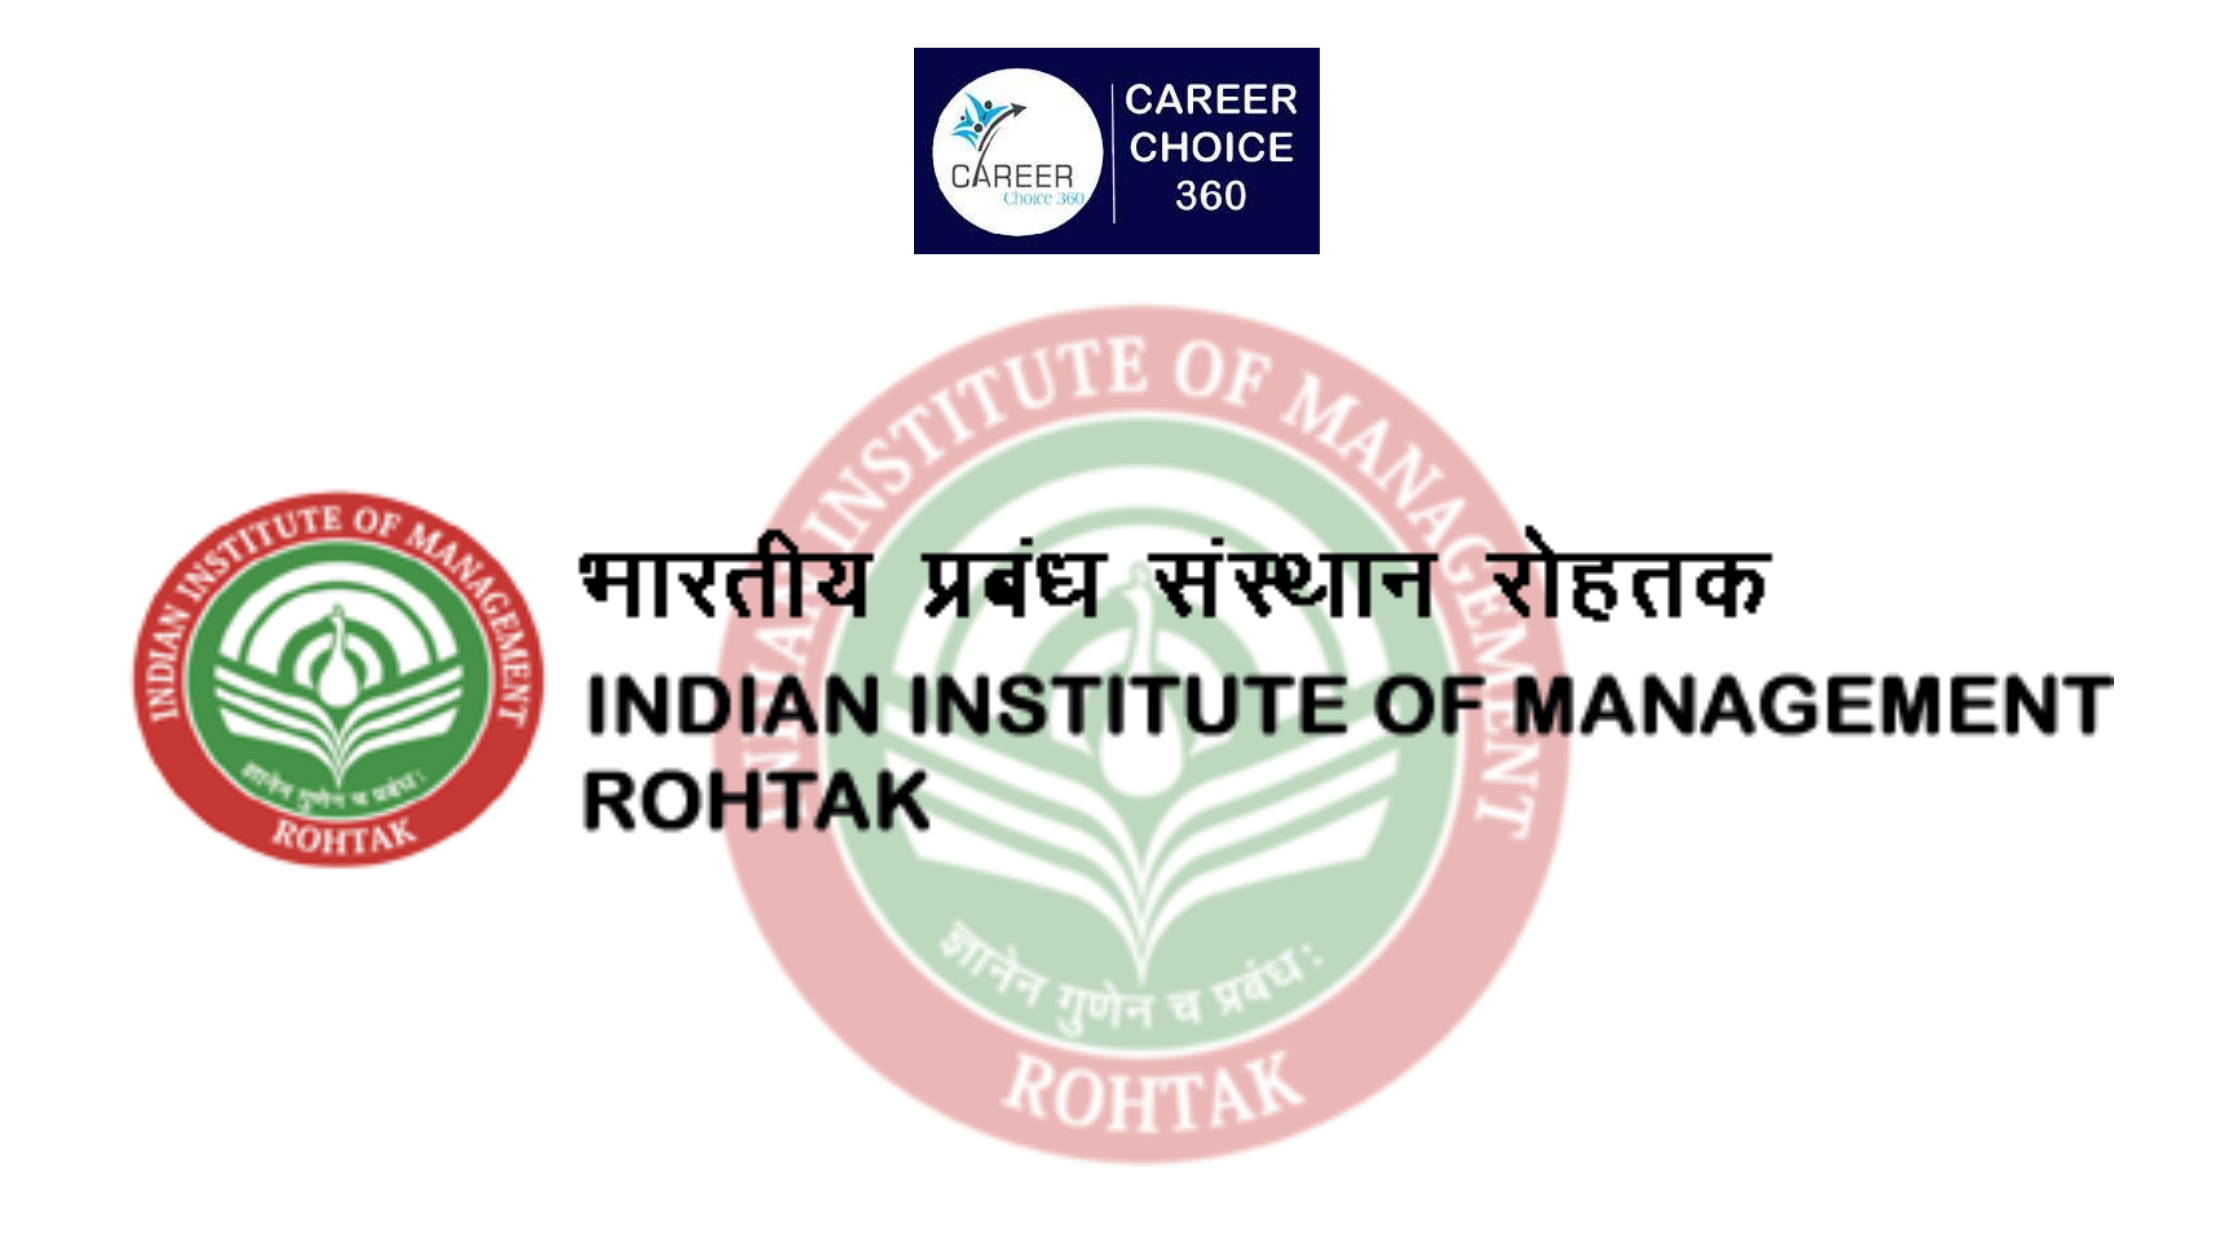 You are currently viewing Indian Institute of Management Rohtak (IIM Rohtak) : Course & Fees, Admission procedure, Rankings, and Placements